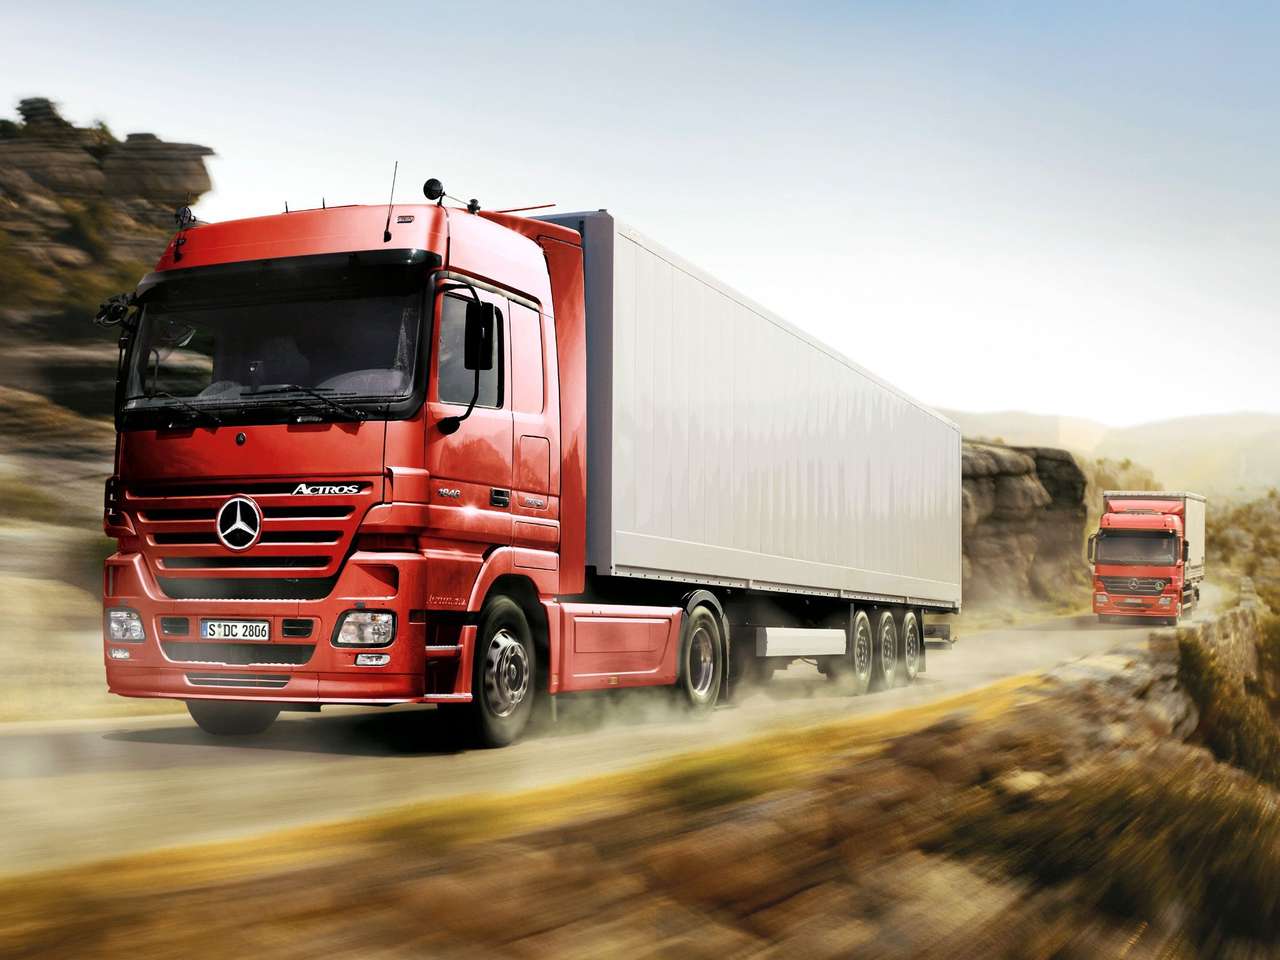 Camion benz. jigsaw puzzle online